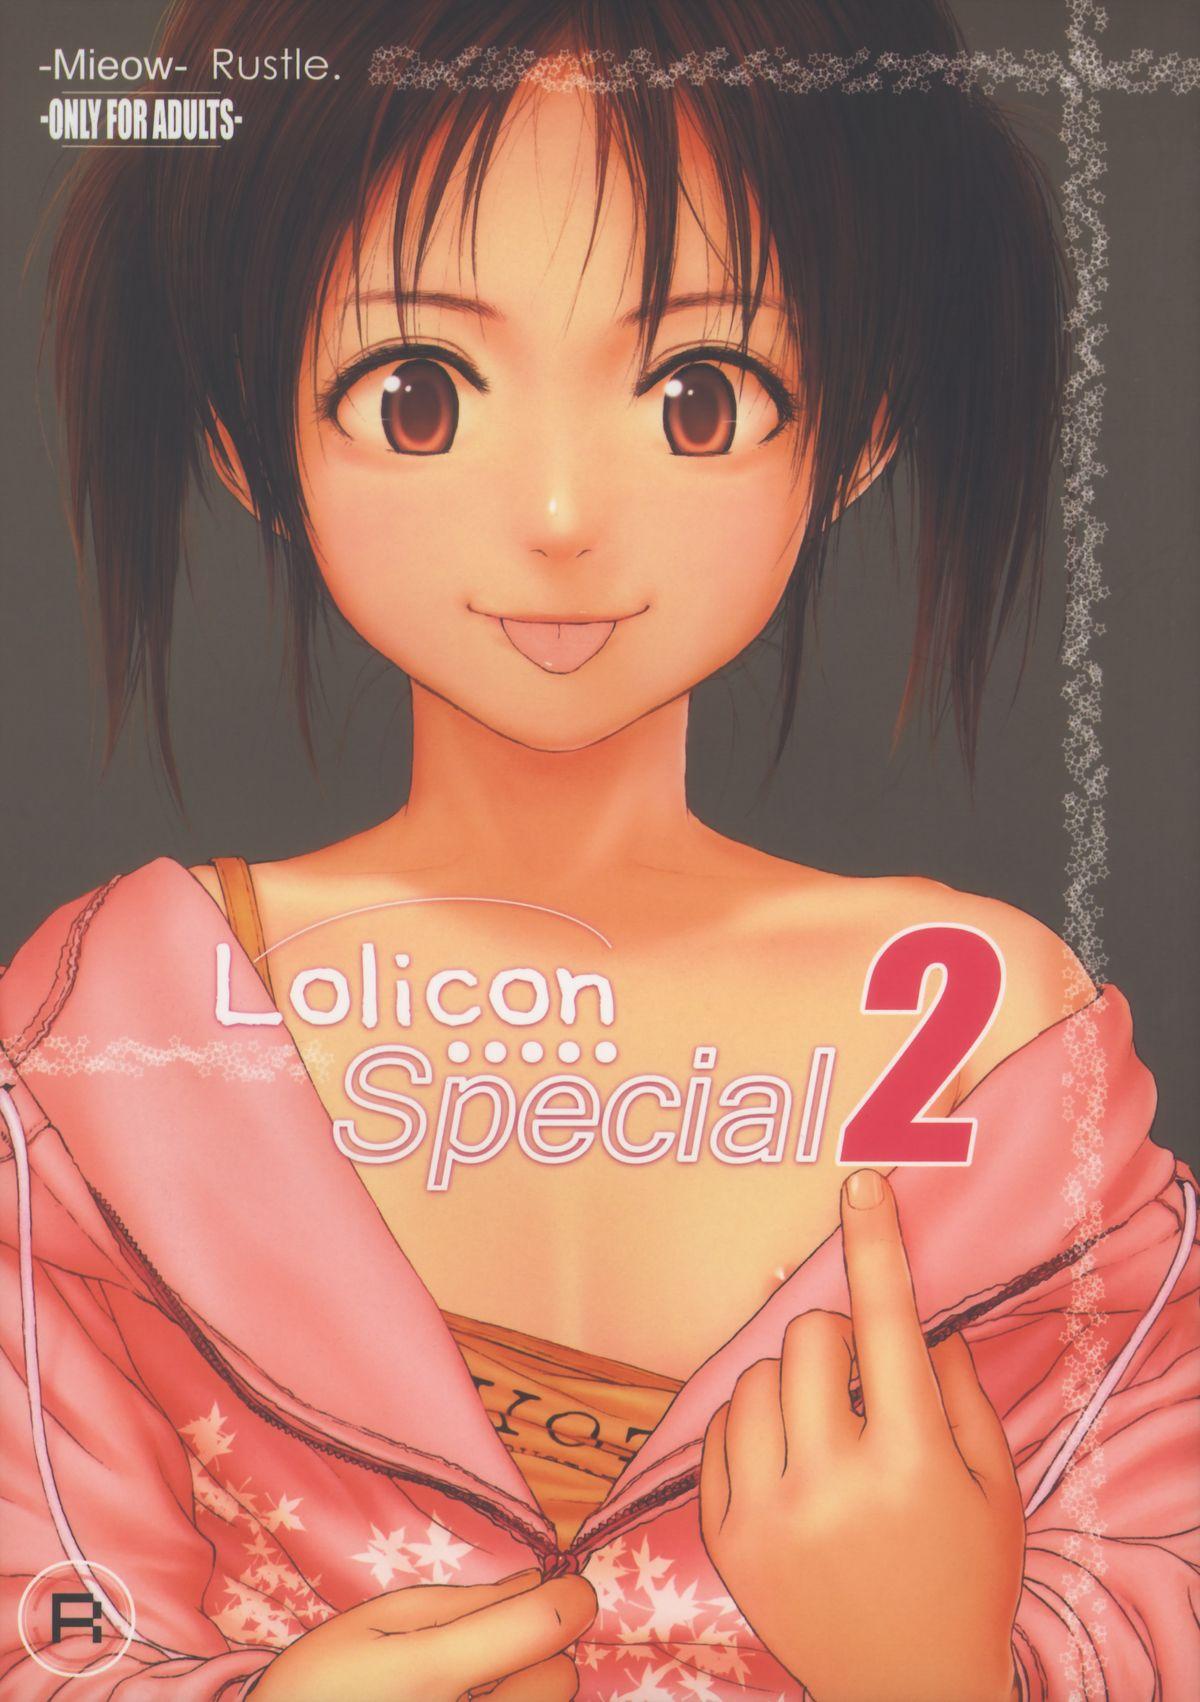 Lolicon Special 2 (C71) [Mieow (らする)]  0